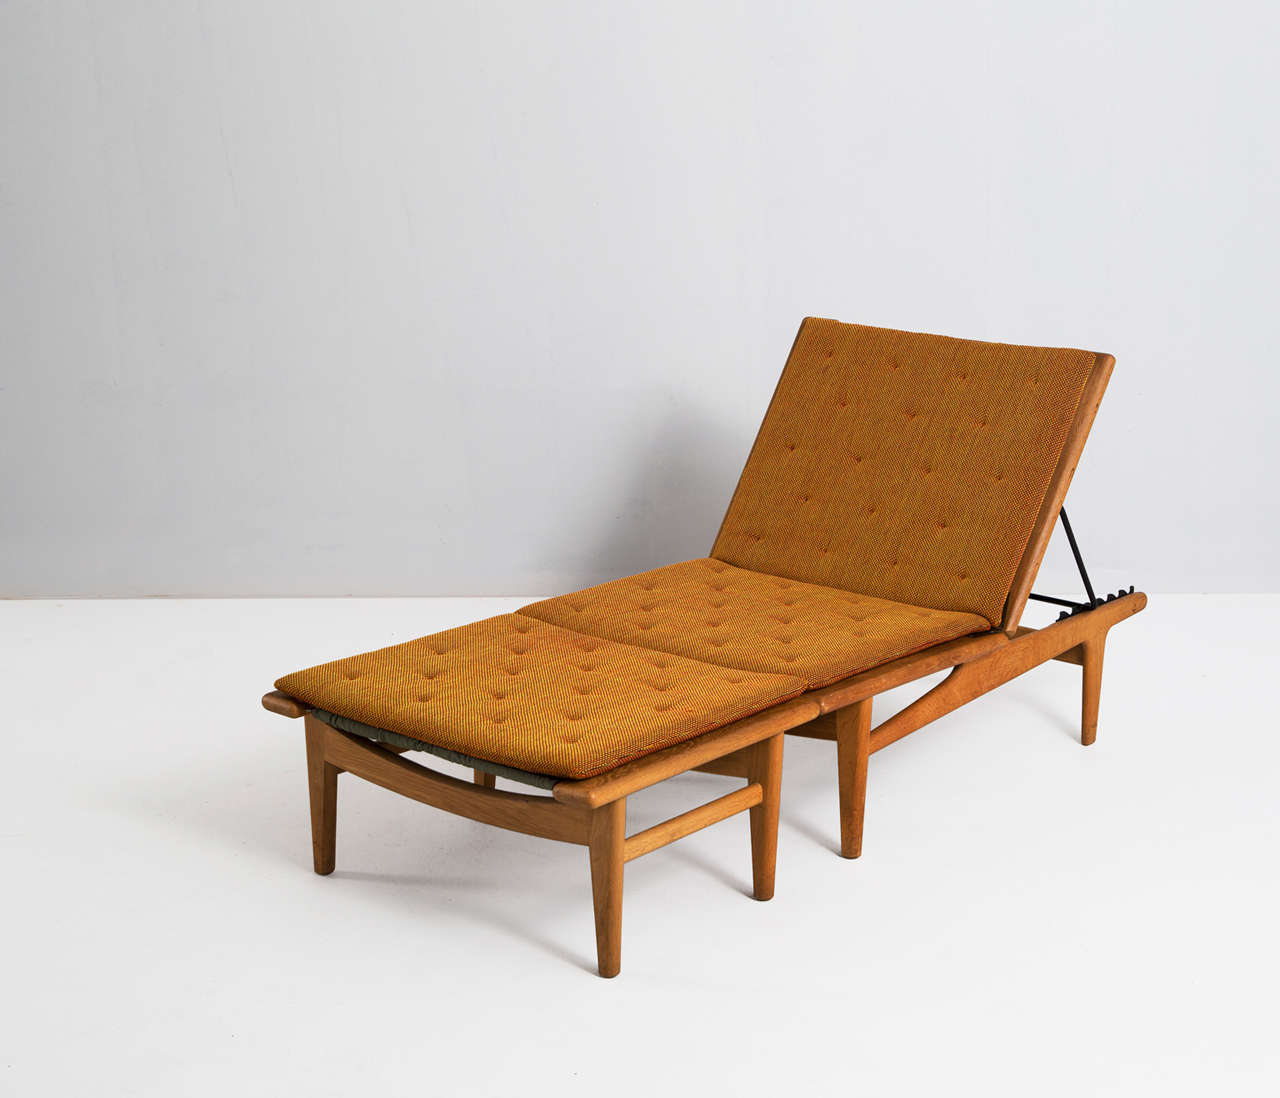 Solid oak daybed by Hans J. Wegner for Getama Denmark, 1954. 

This daybed is a perfect example of Scandinavian modernism. The wooden joints in this magnificent chaise longue are very well made as wel the solid brass details. High quality latex